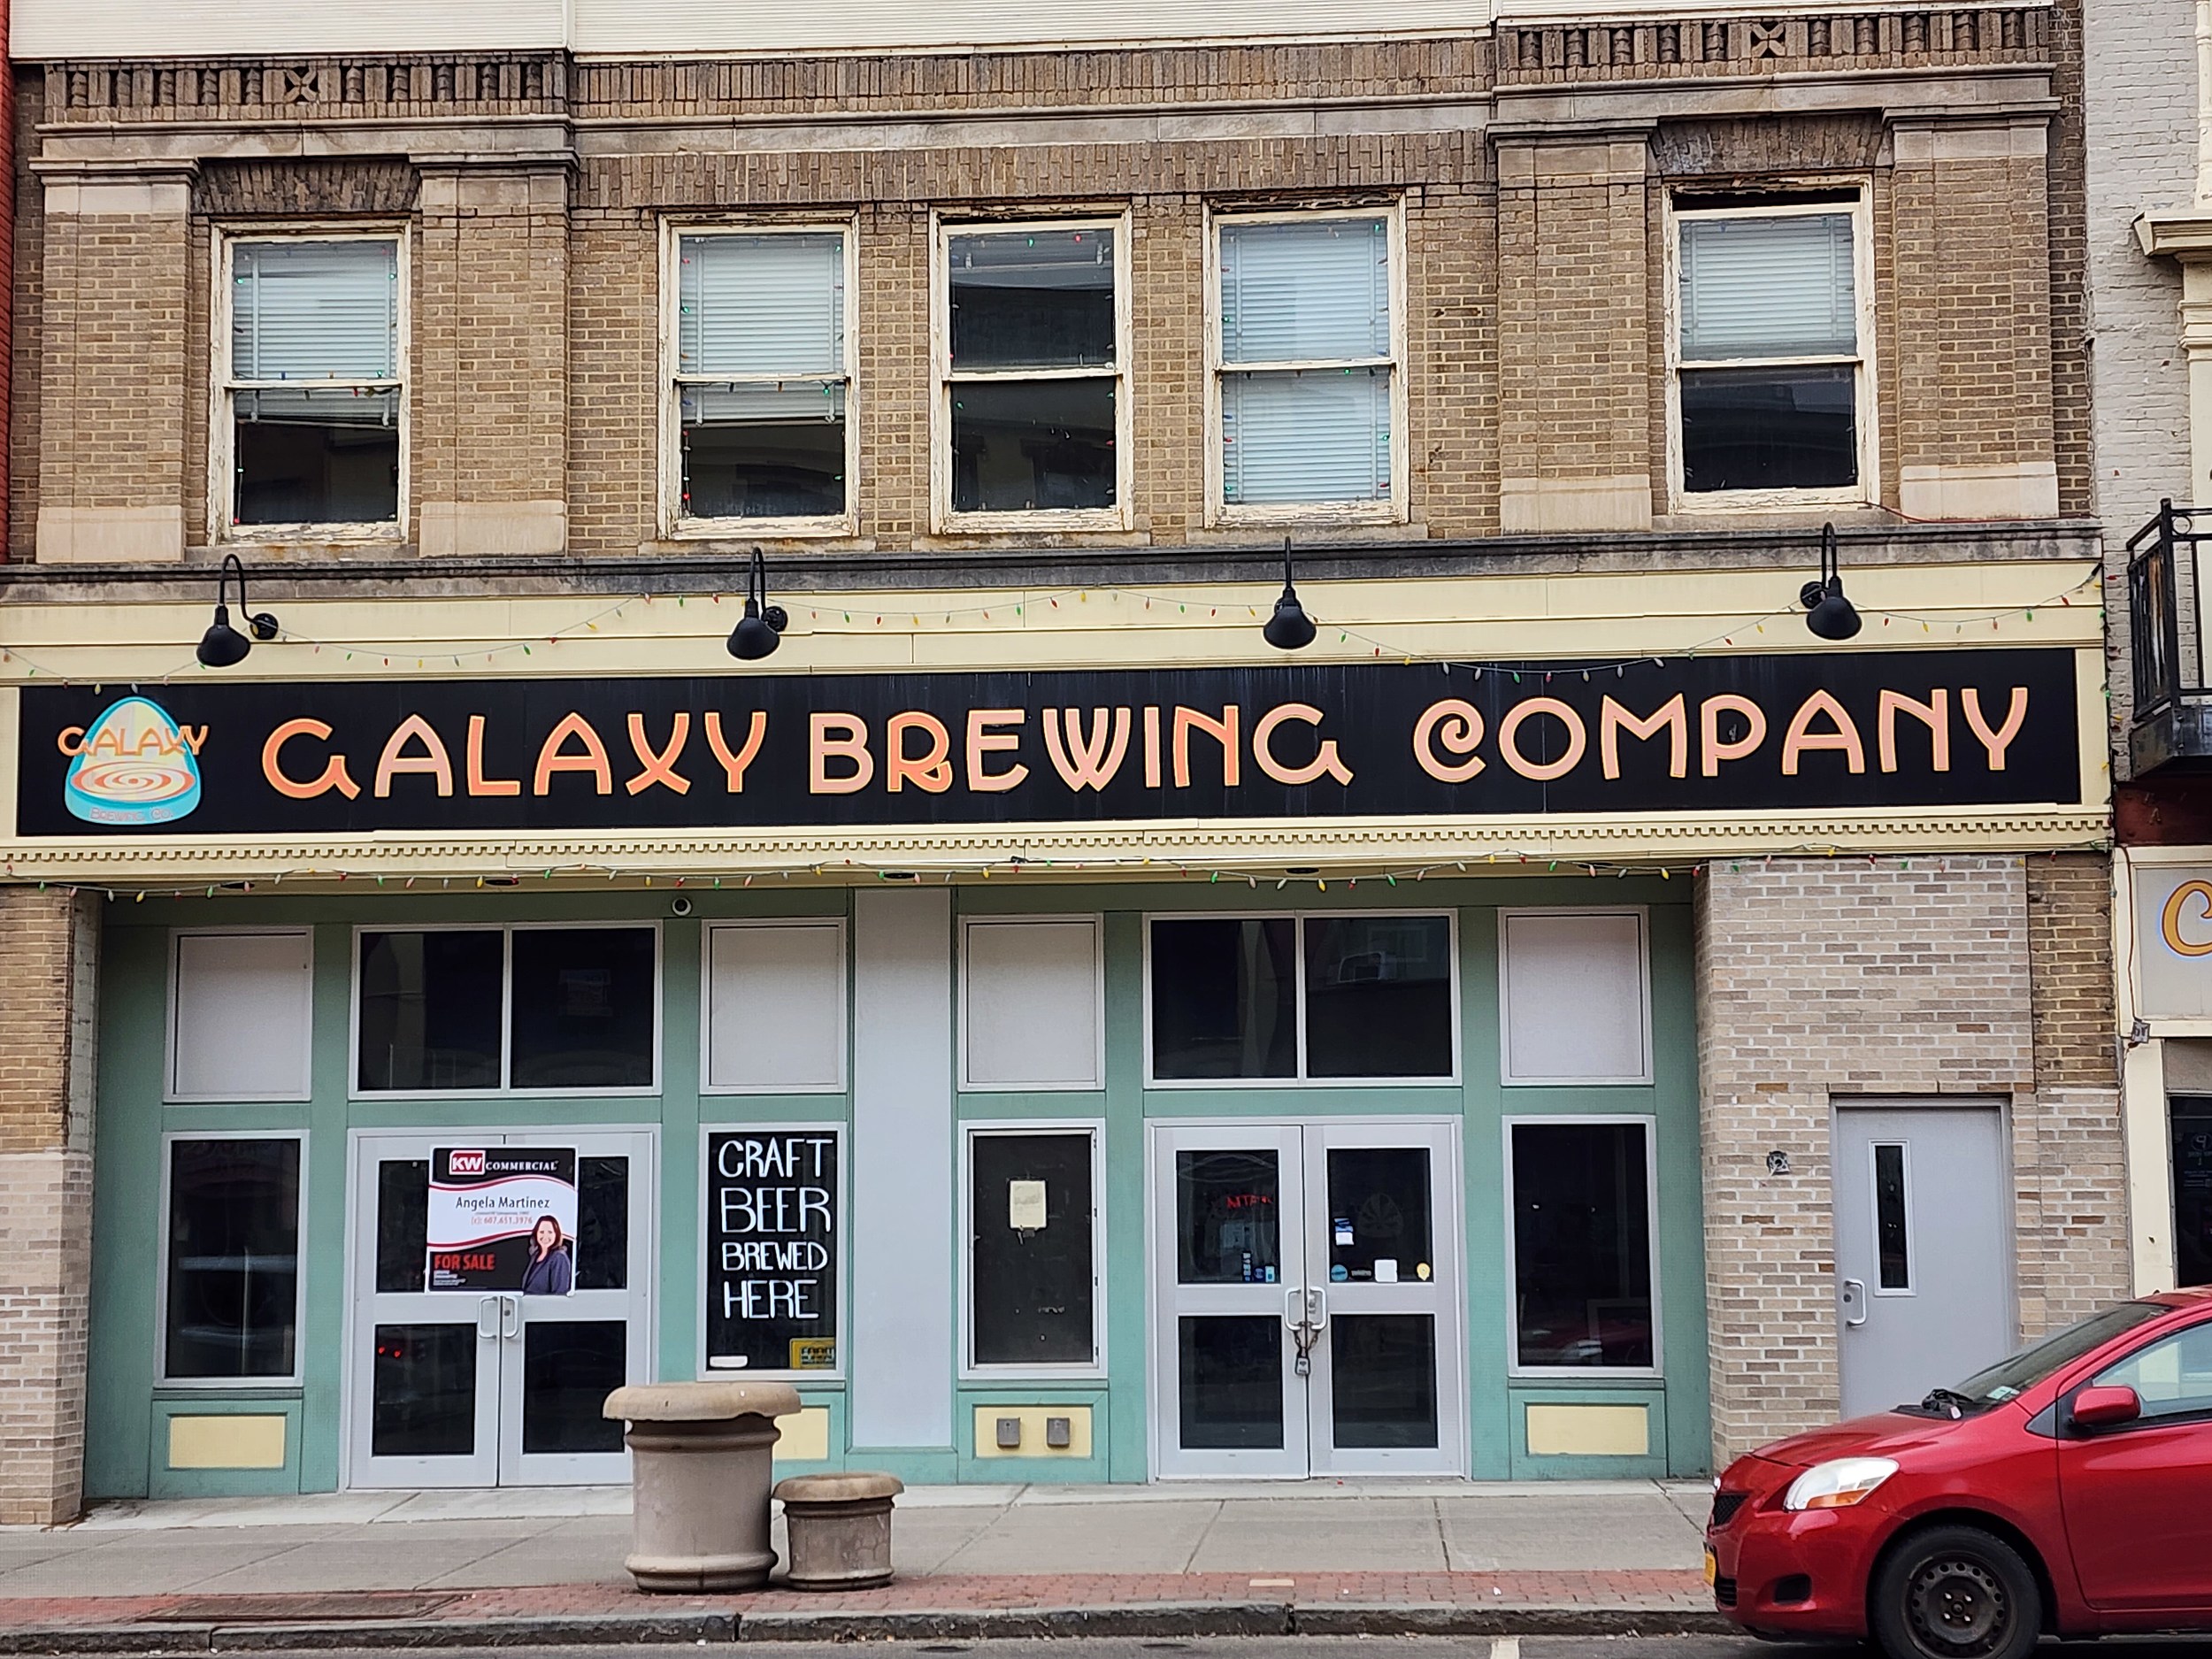 Binghamton's Galaxy Brewing Property and Equipment for Sale